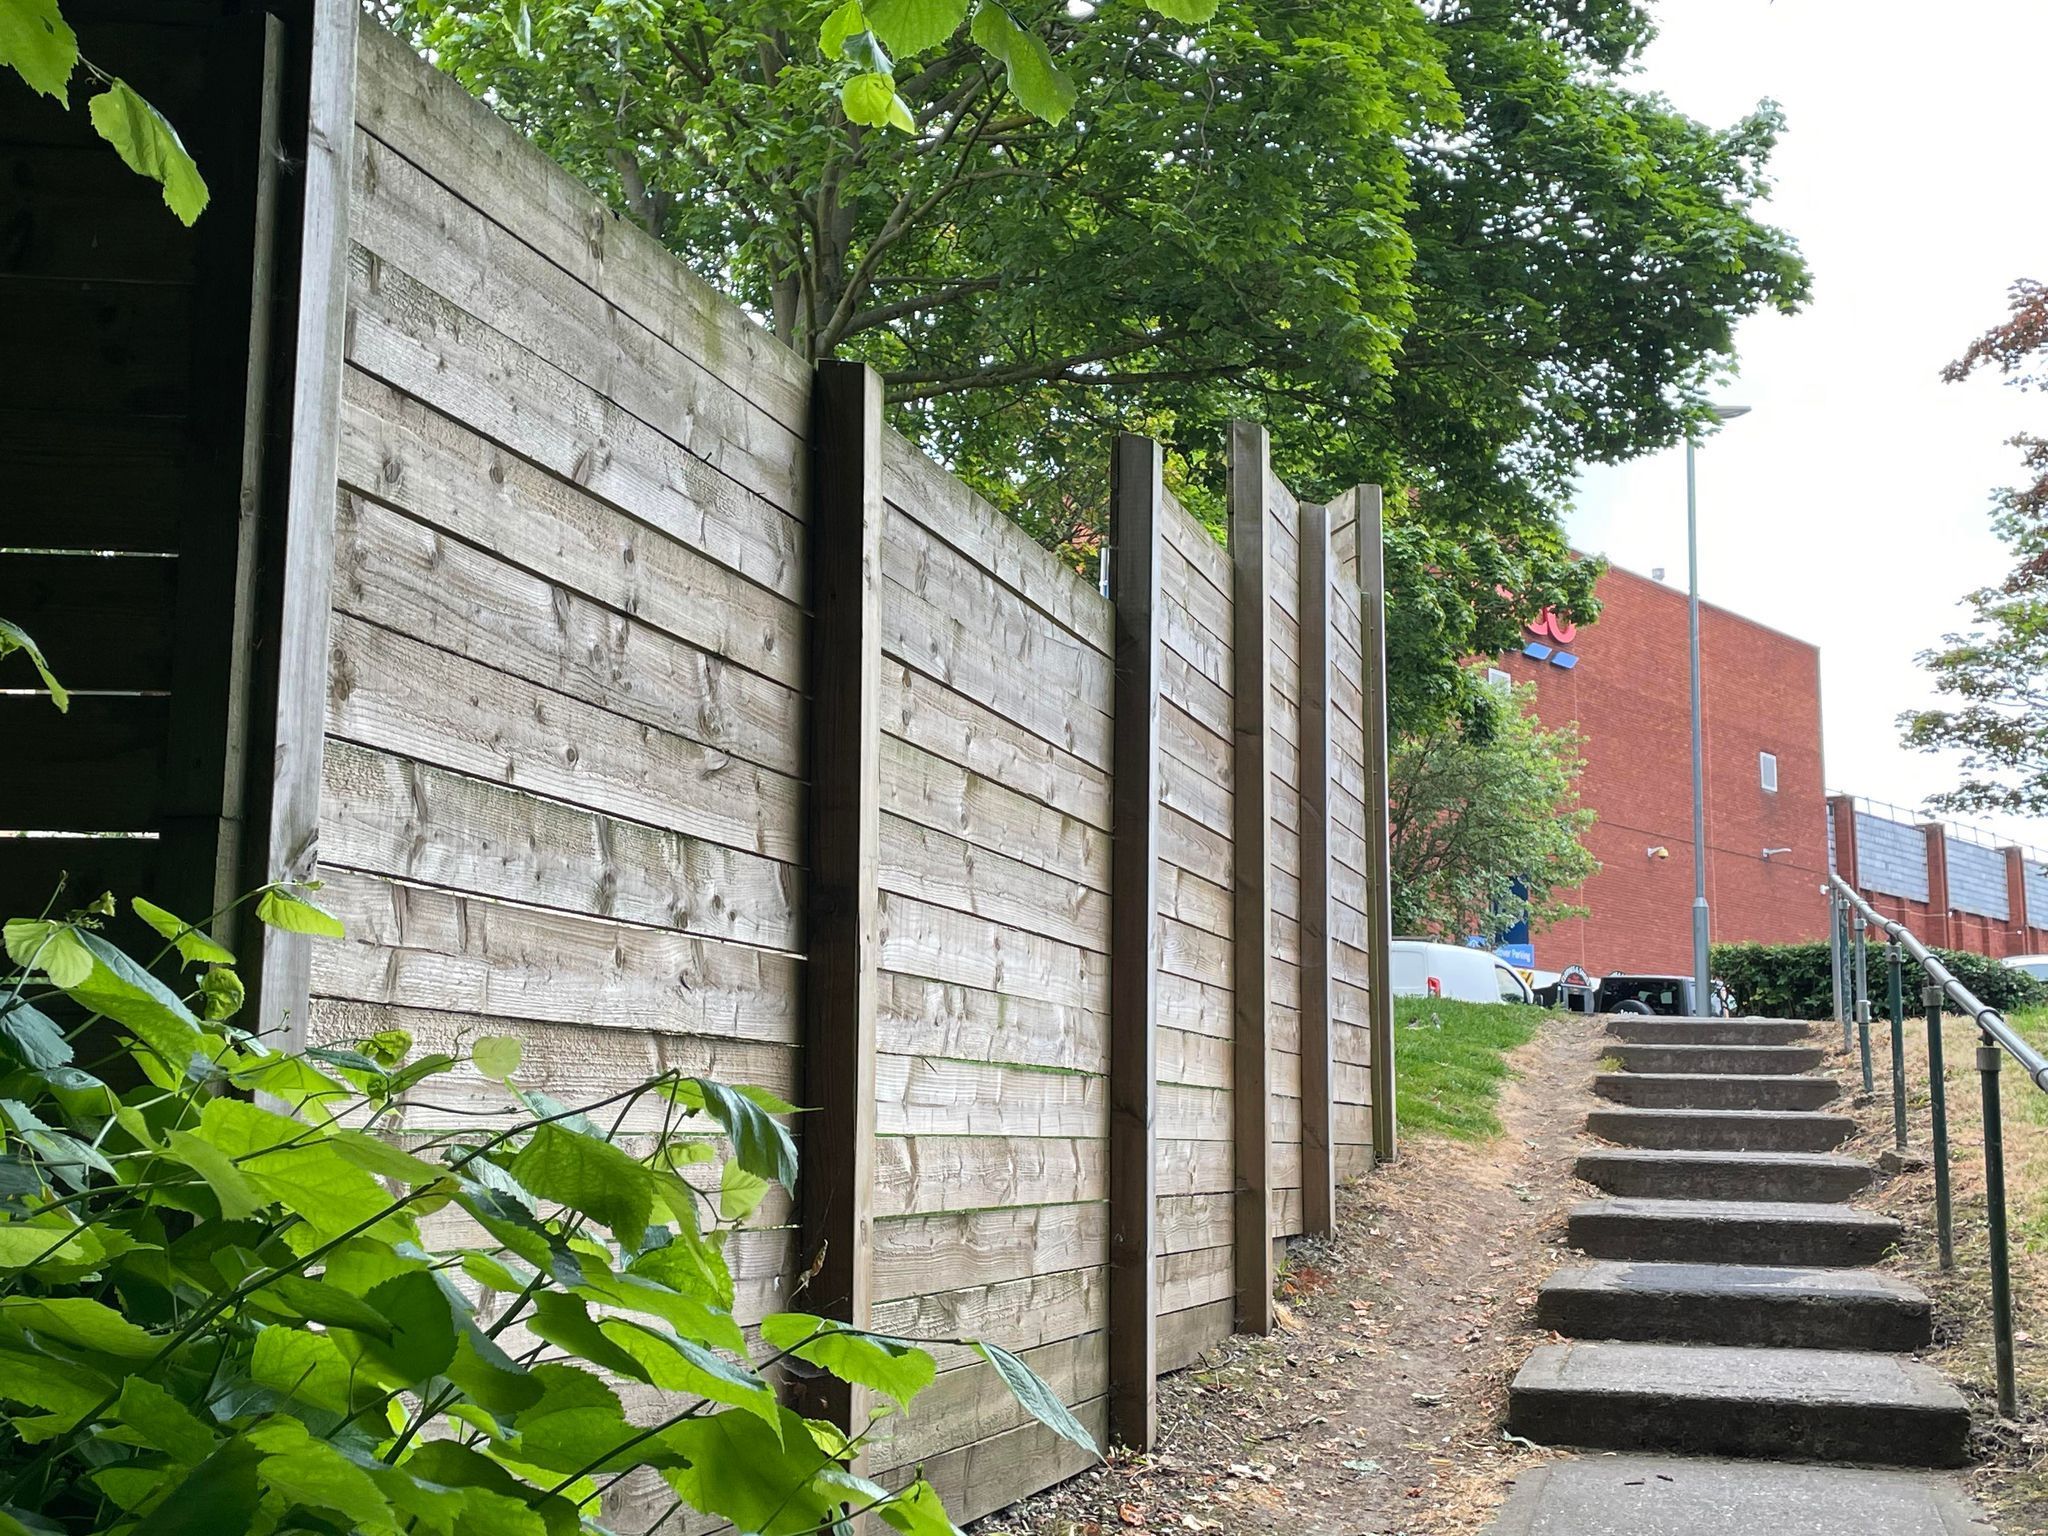 A path leading along fencing towards a Tesco store